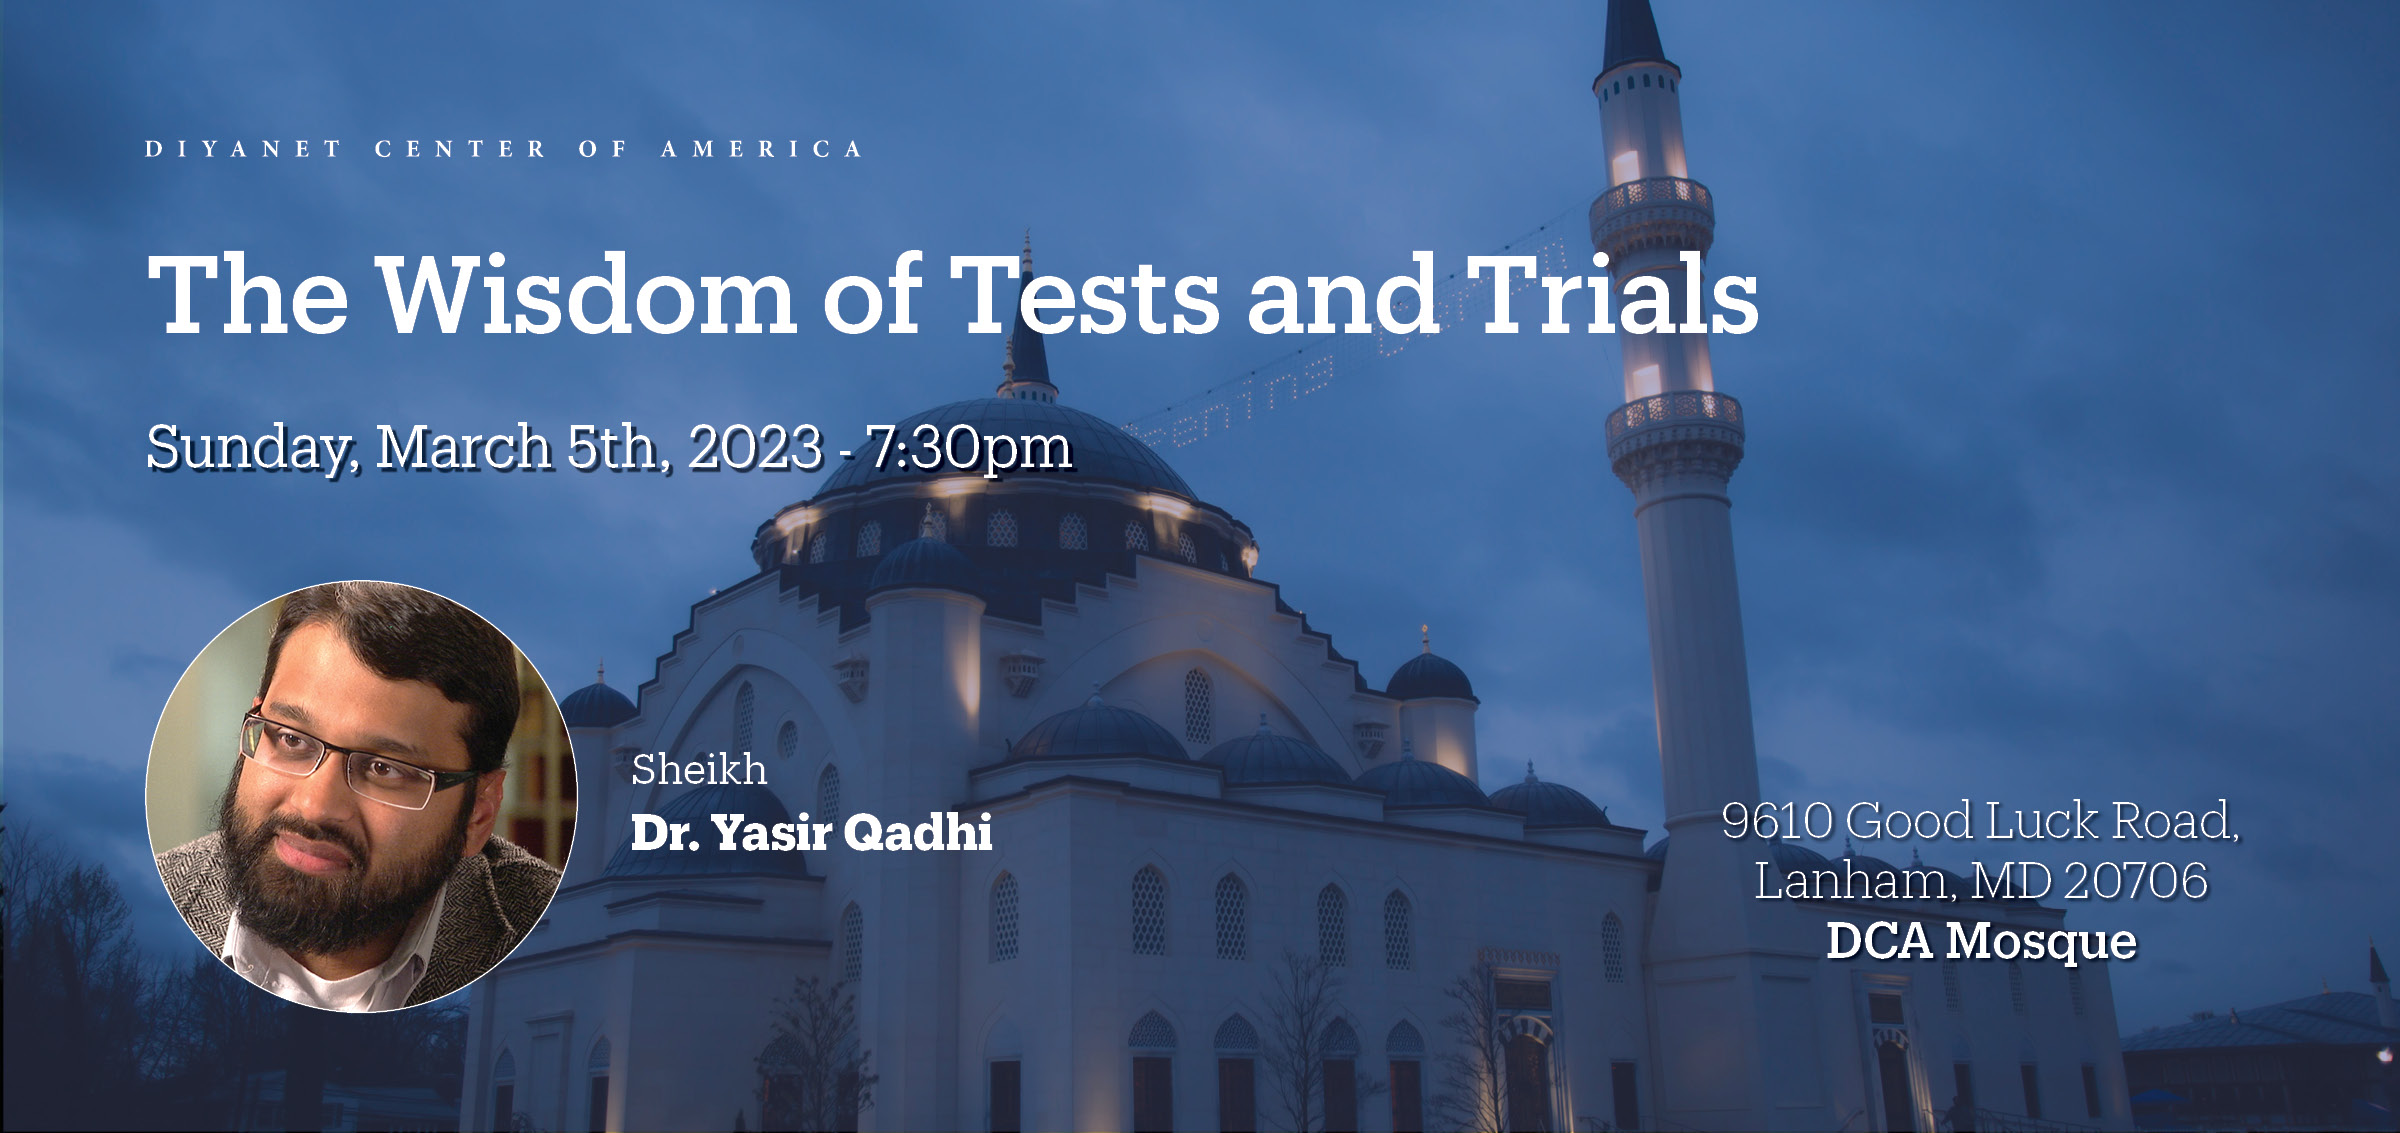 The Wisdom of Tests and Trials